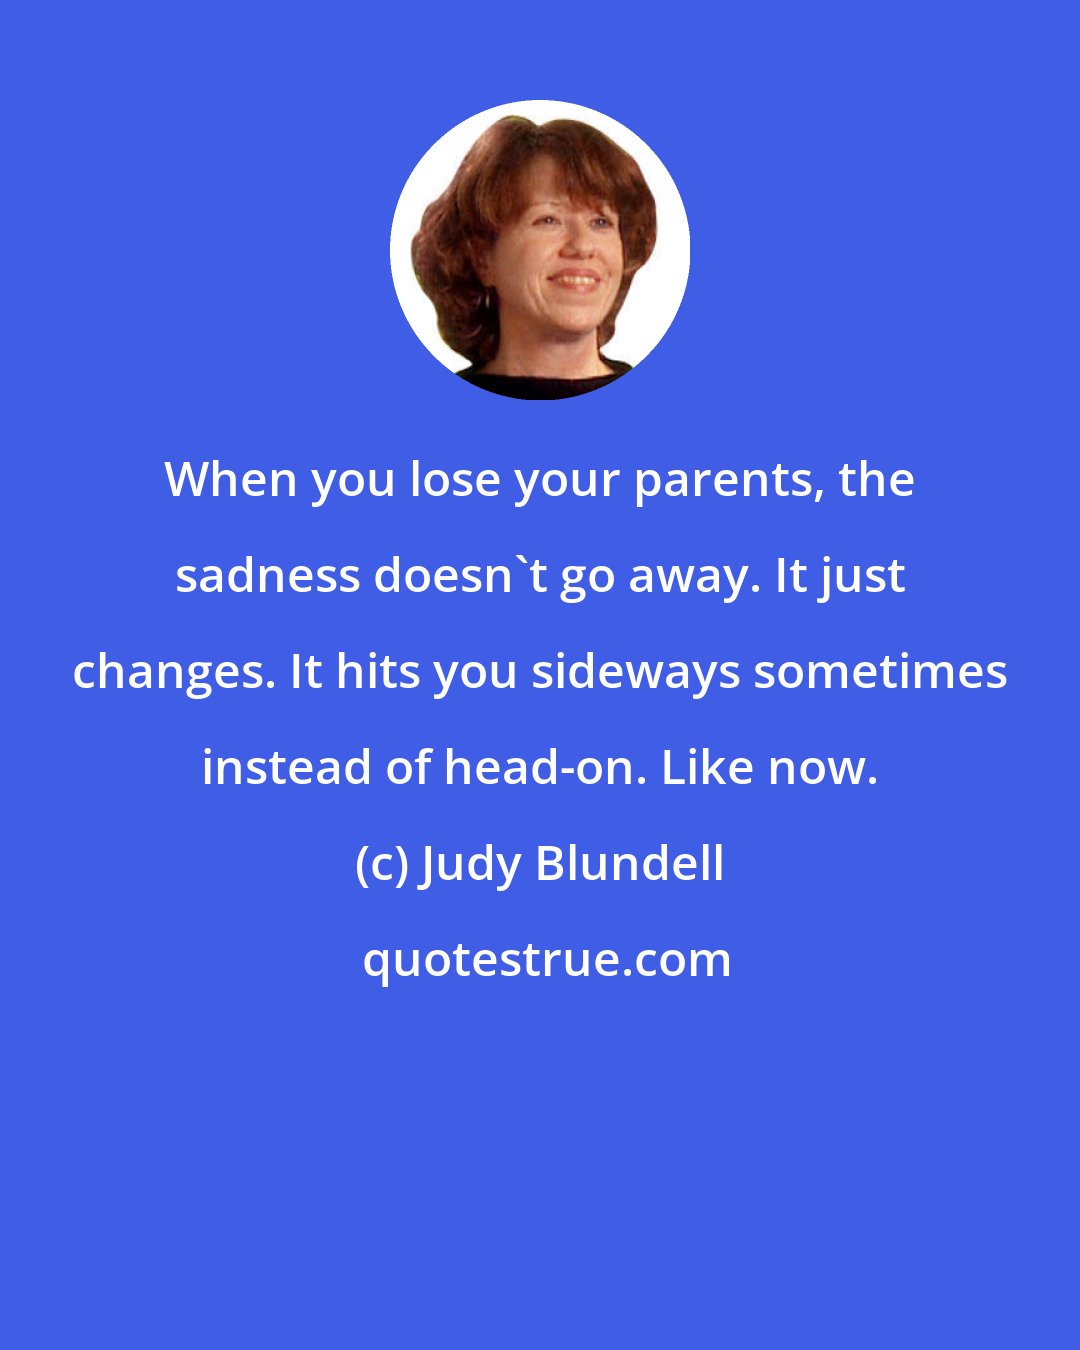 Judy Blundell: When you lose your parents, the sadness doesn't go away. It just changes. It hits you sideways sometimes instead of head-on. Like now.